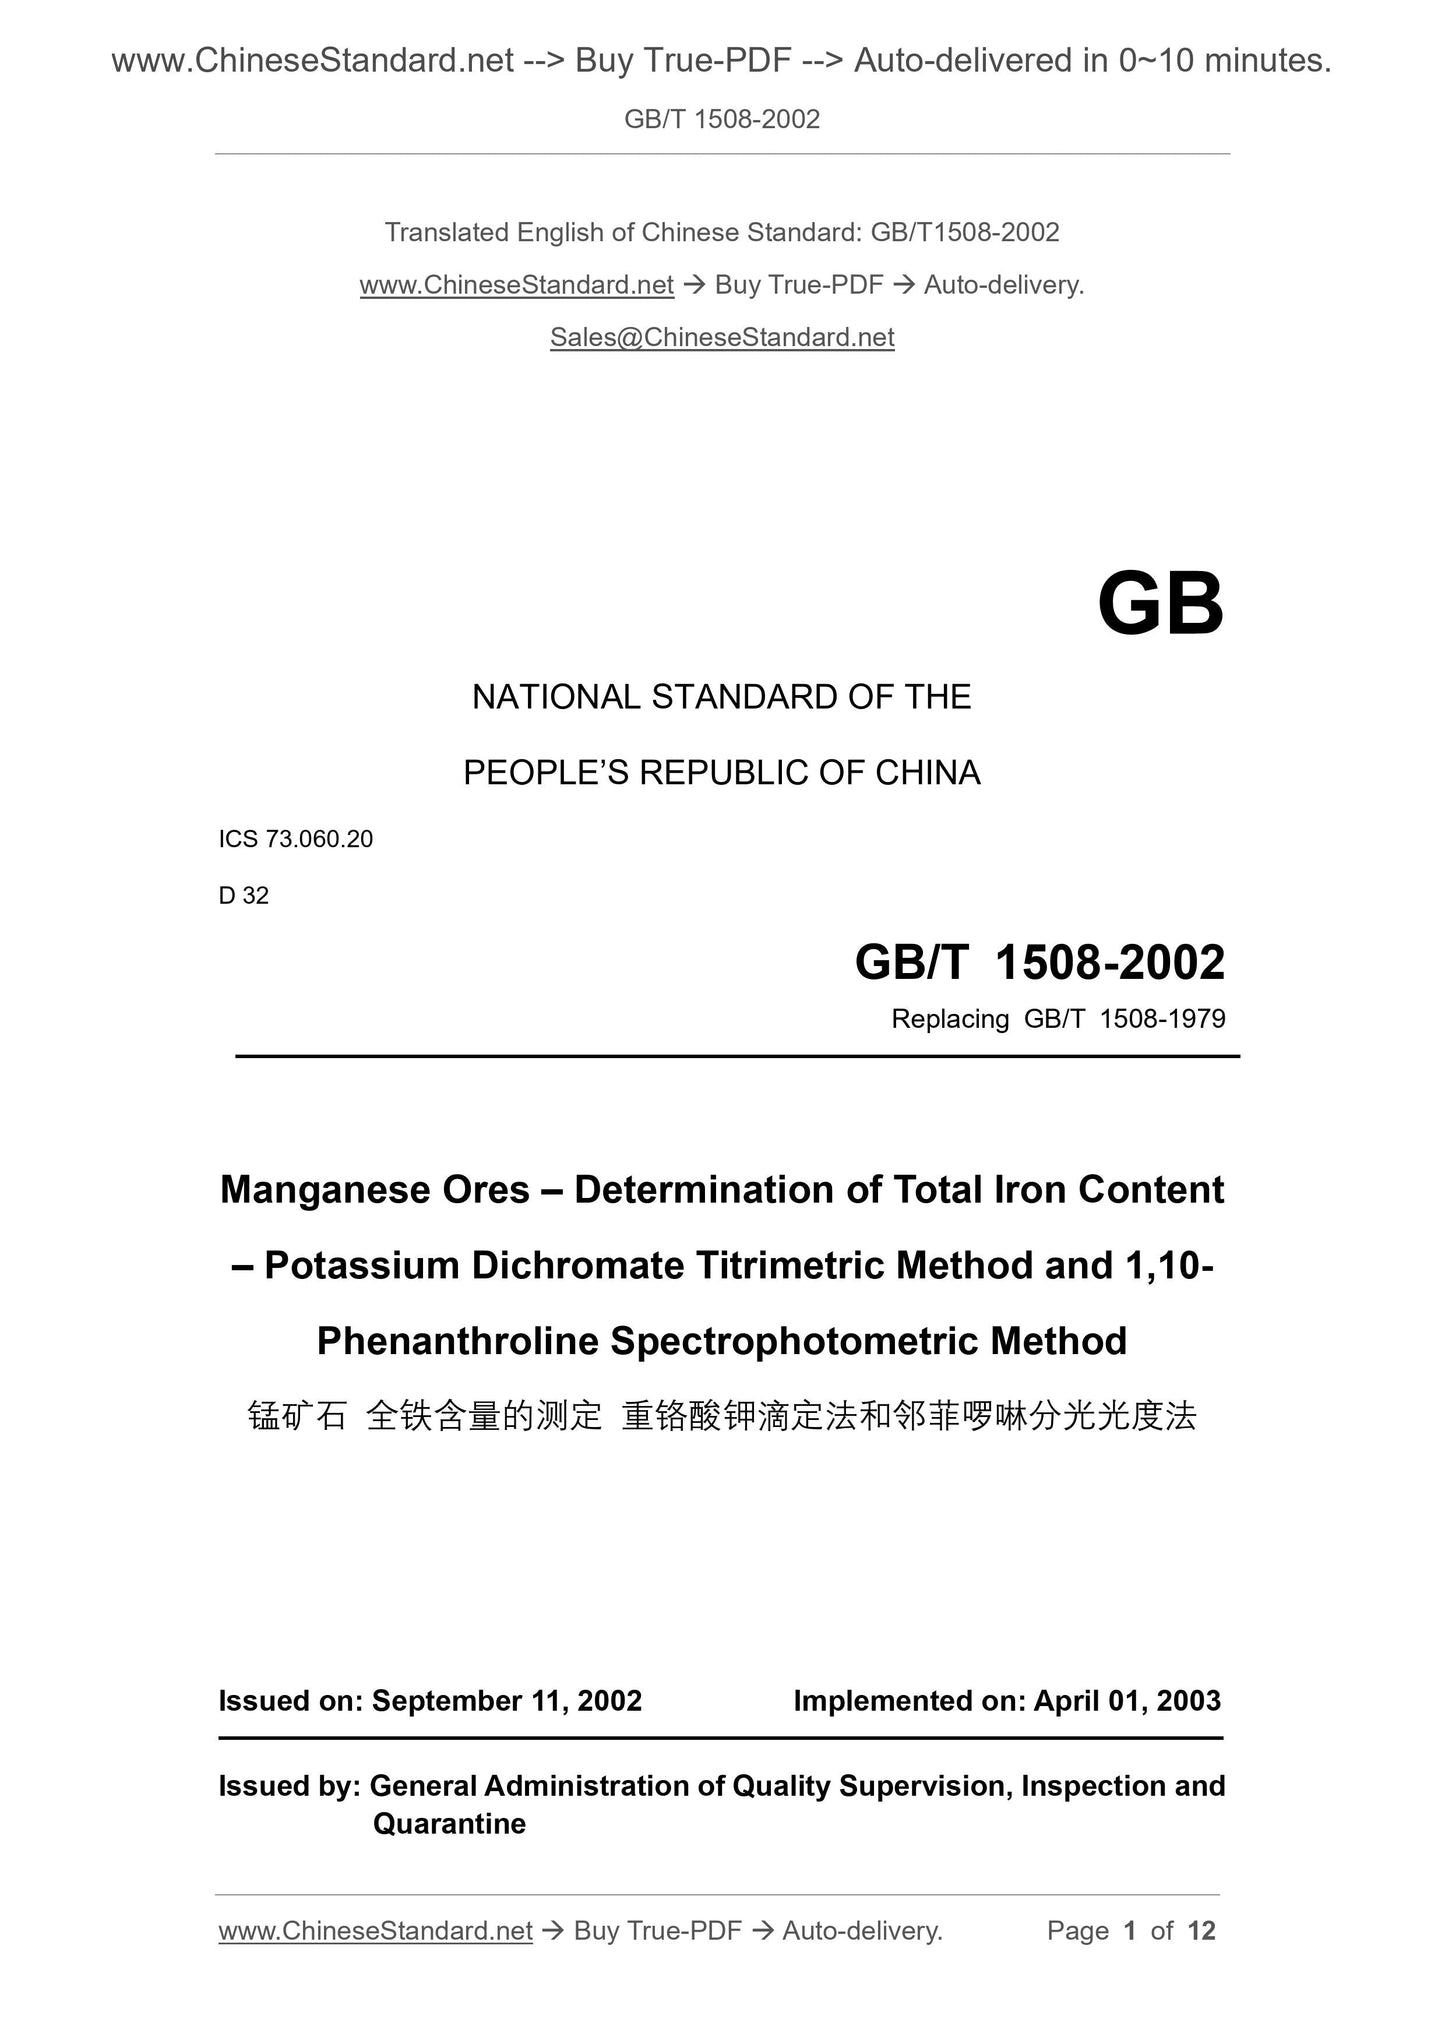 GB/T 1508-2002 Page 1